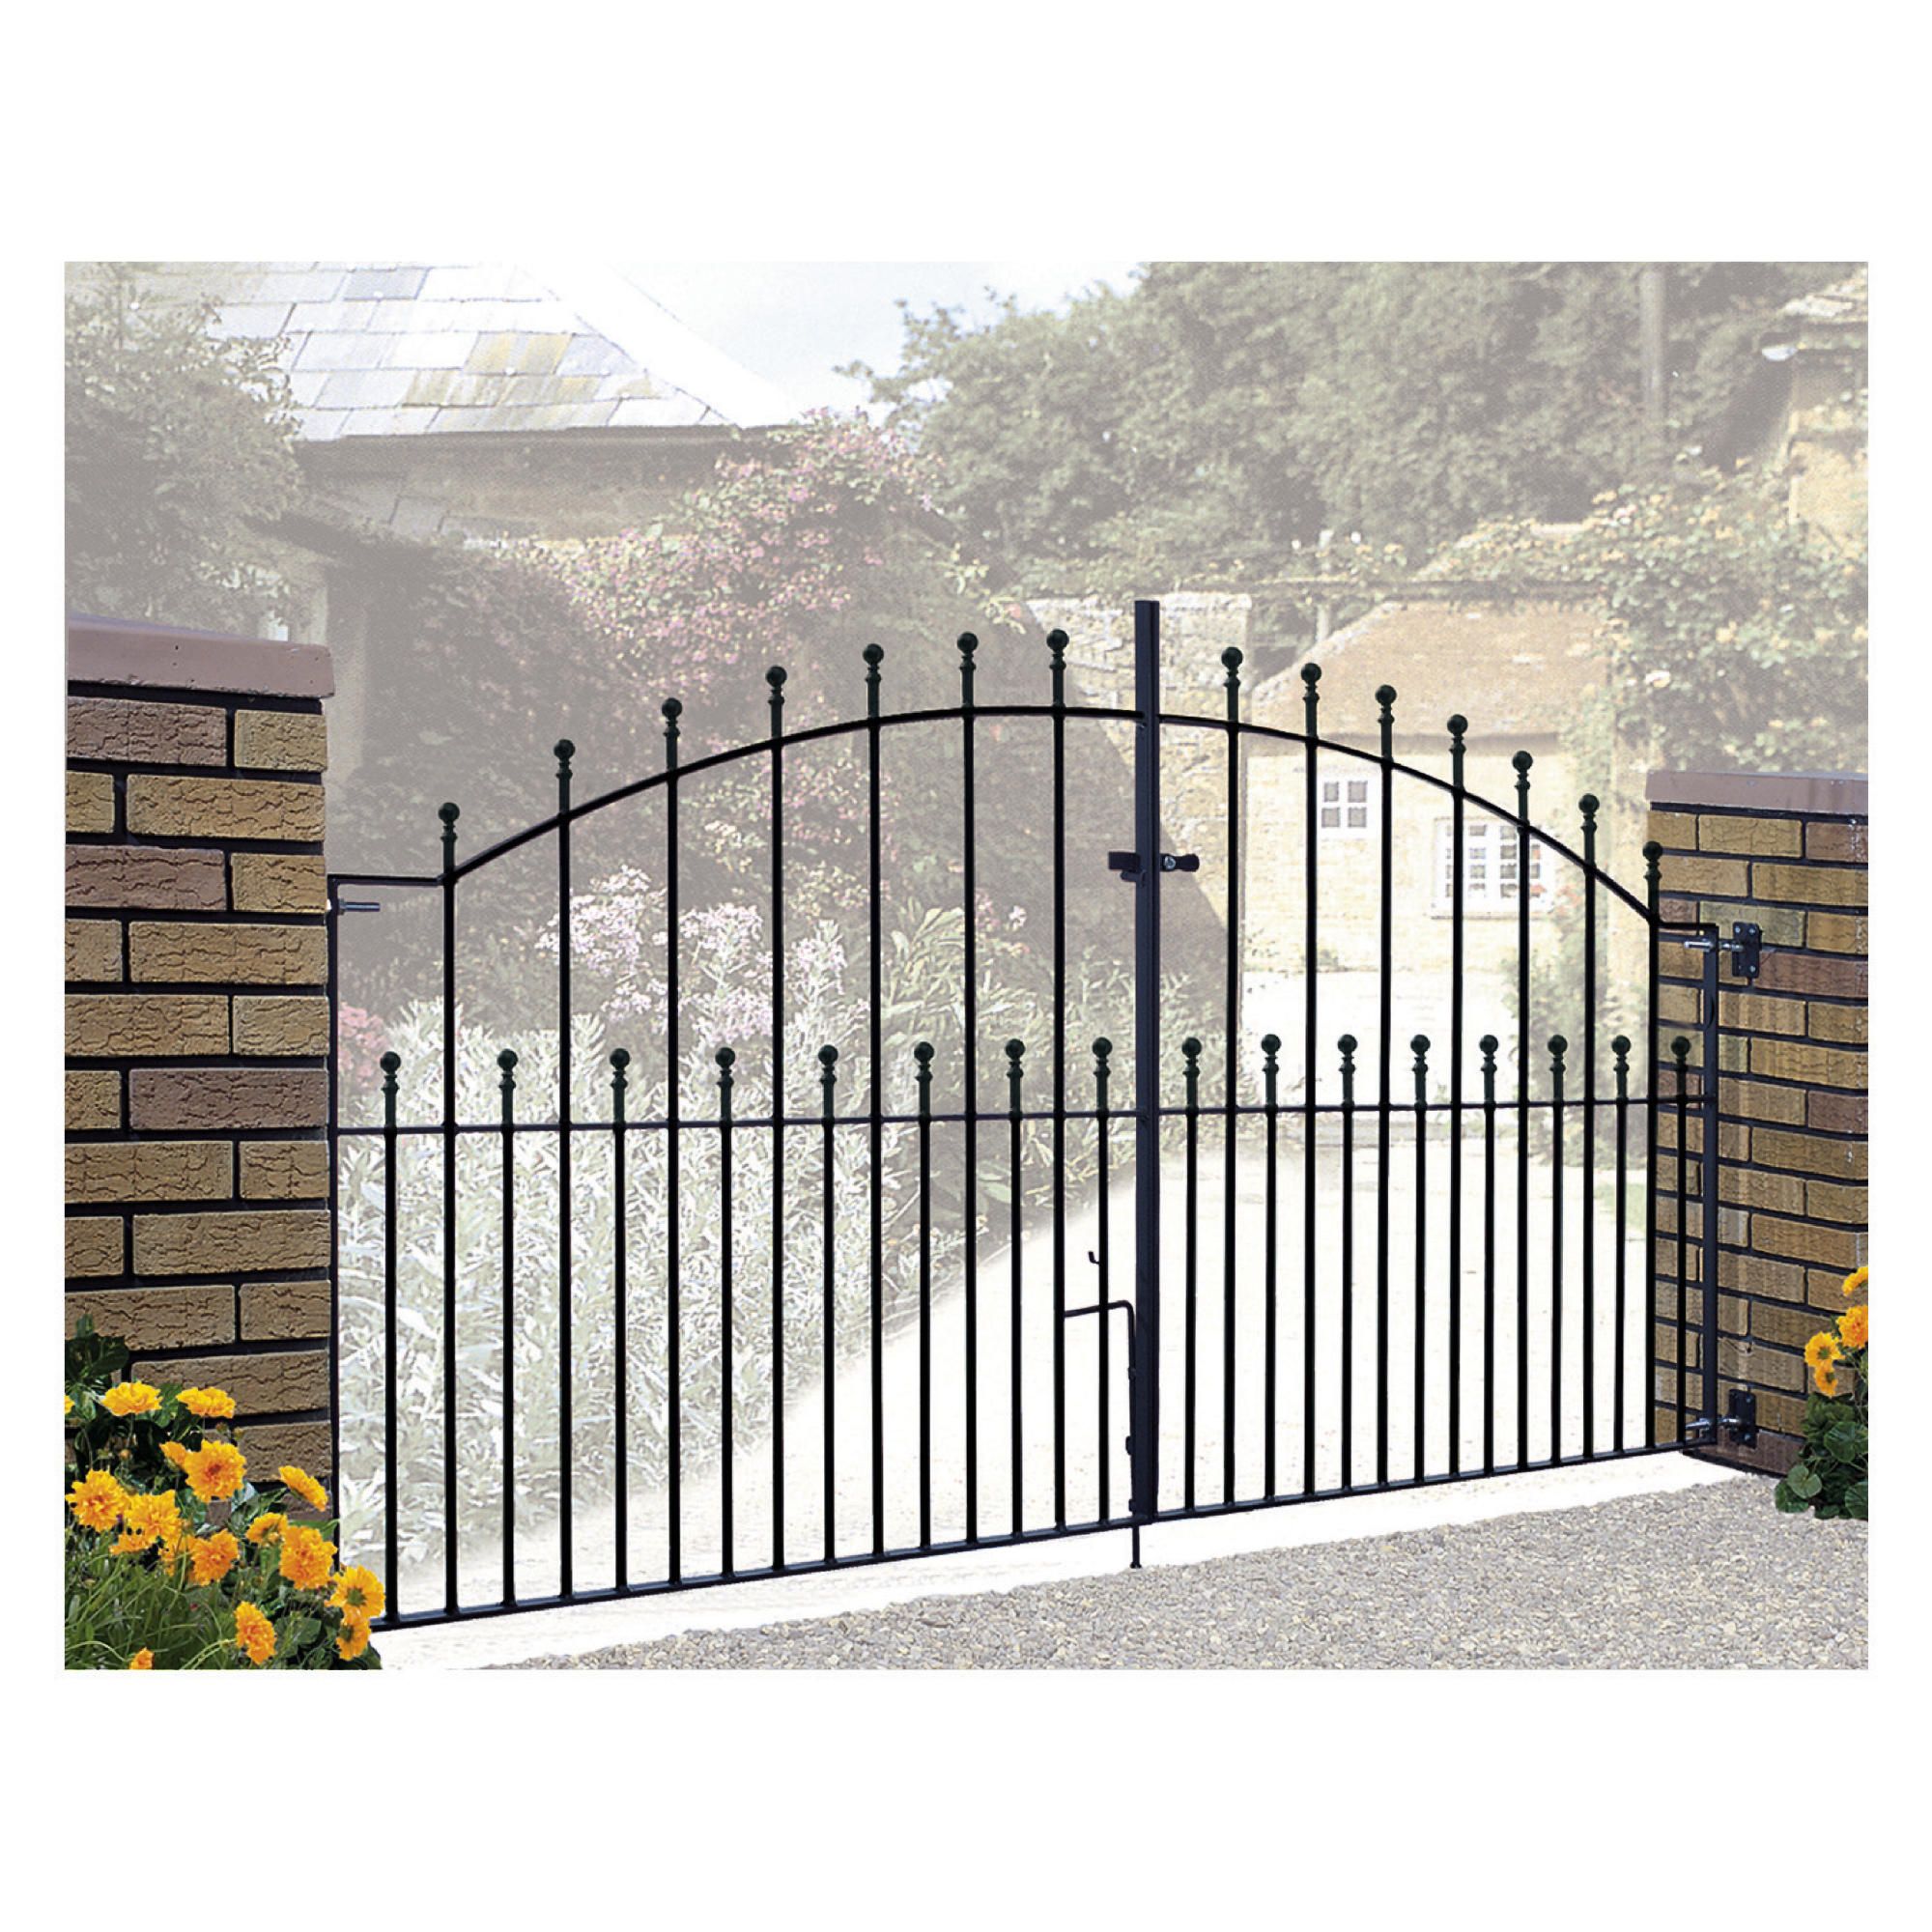 Burbage Manor Ball Double Metal Gate MA19 at Tesco Direct